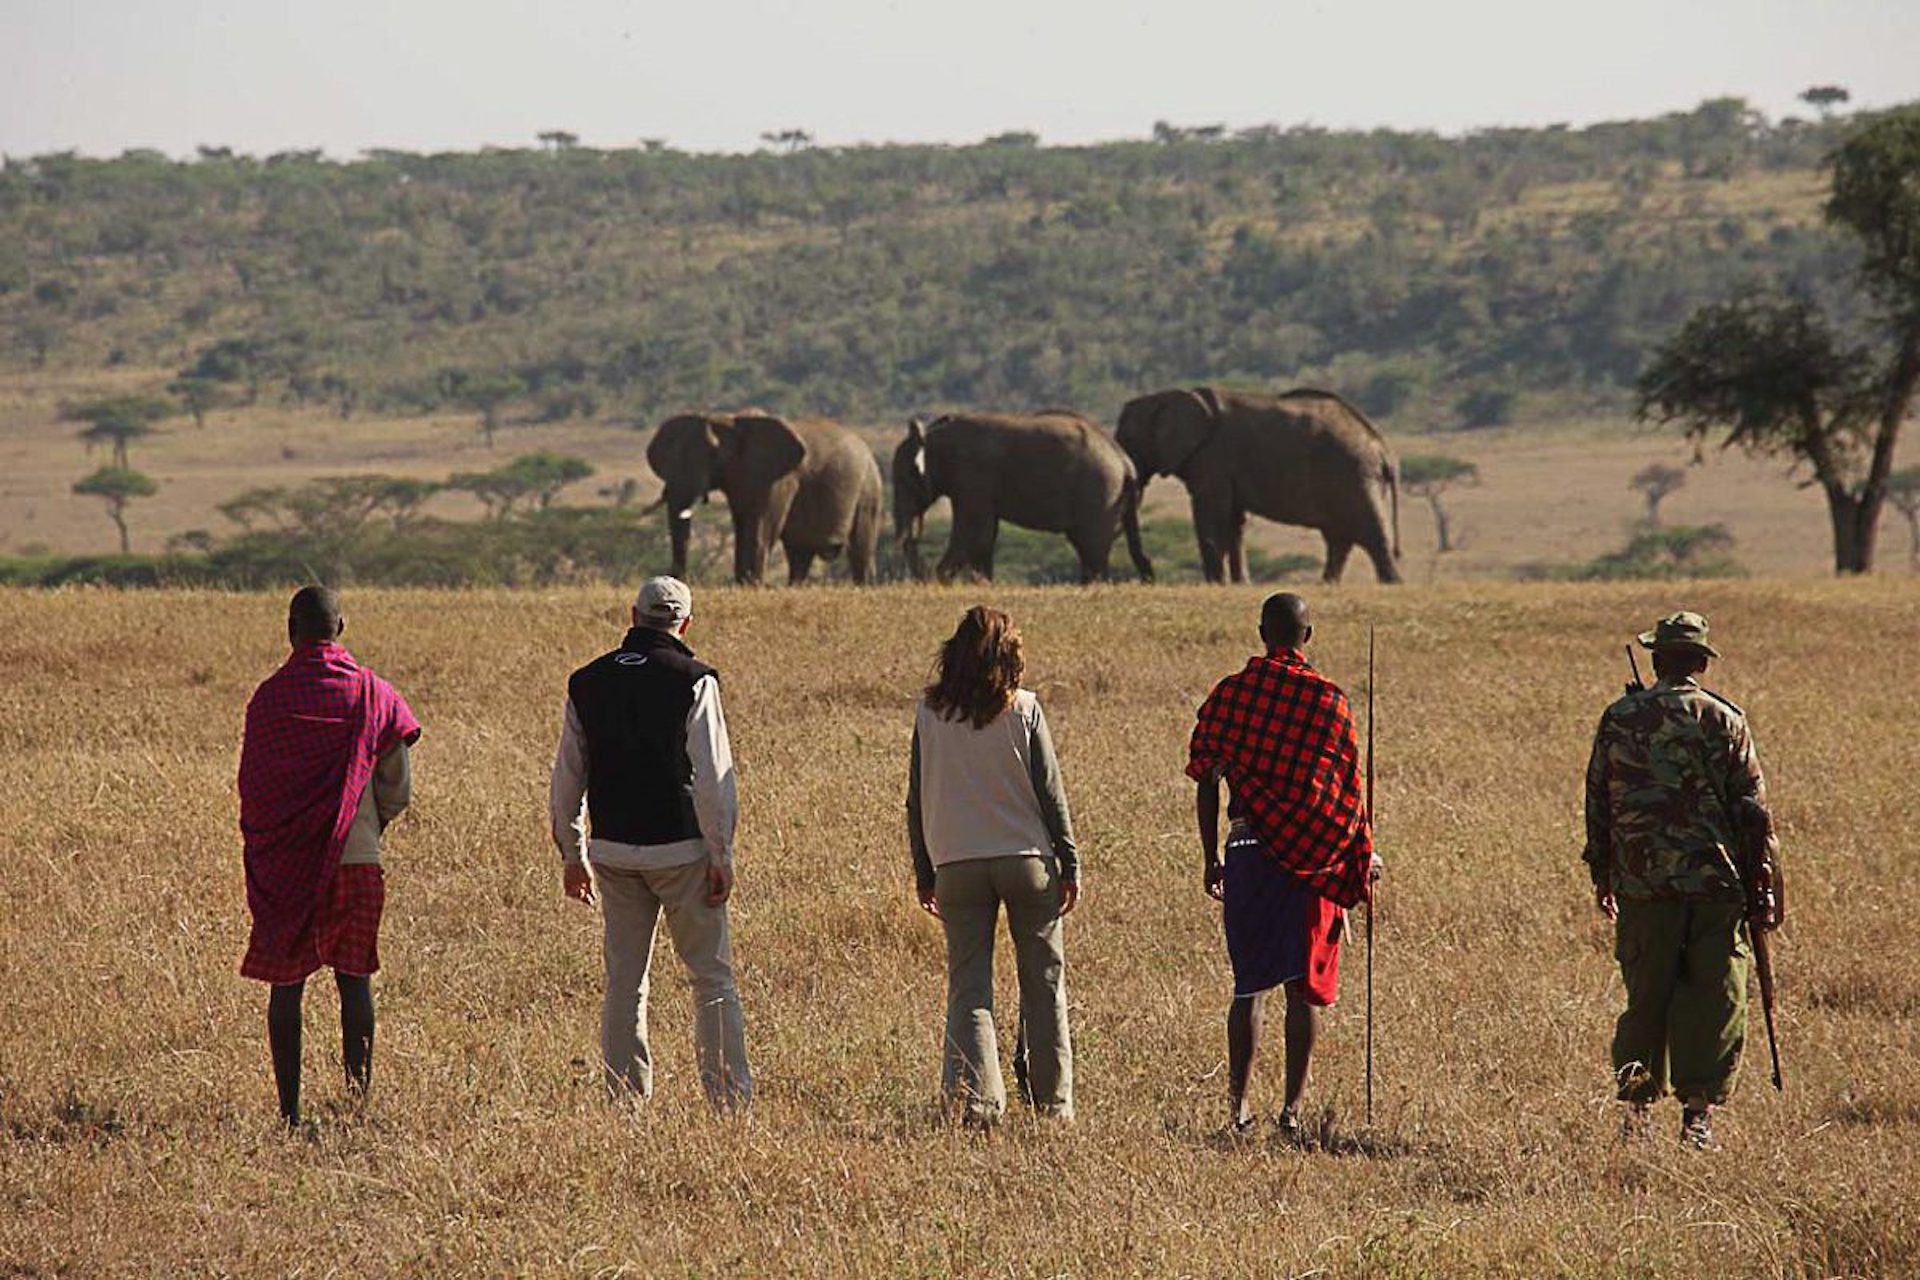 Experience the amazing walking Safari with World Adventure Tours